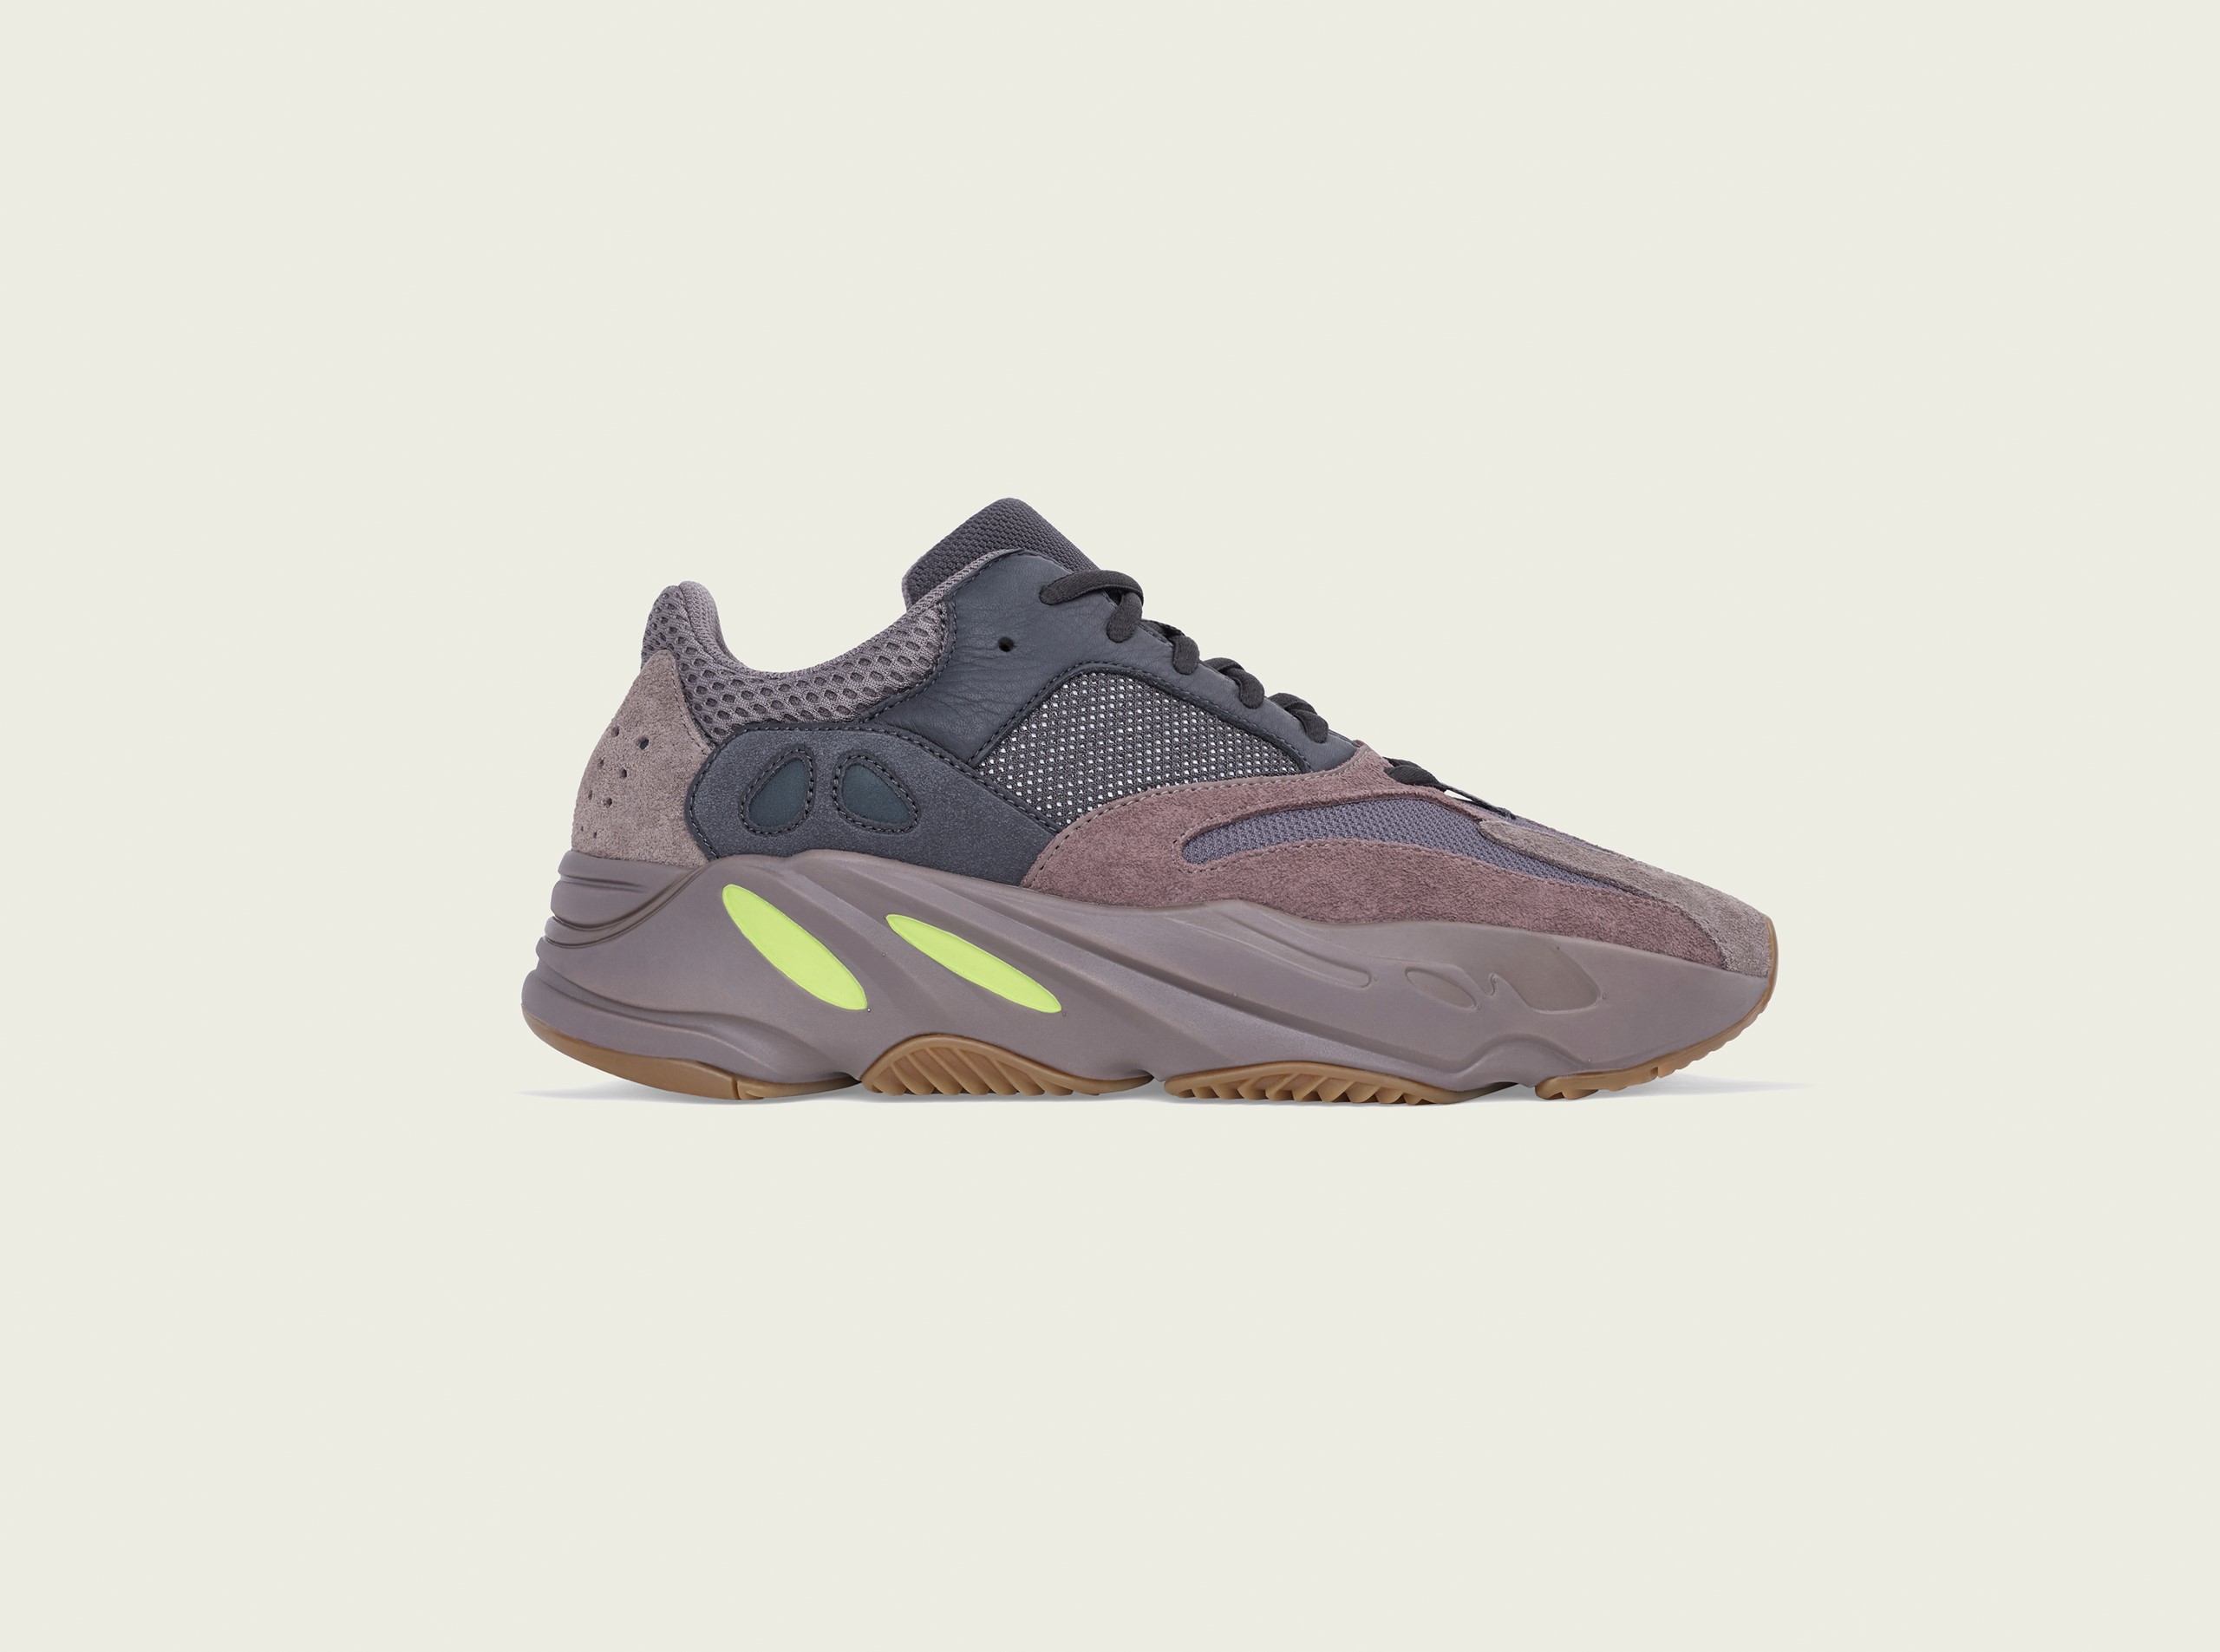 Permanece temblor Planta de semillero adidas News Site | Press Resources for all Brands, Sports and Innovations :  YEEZY